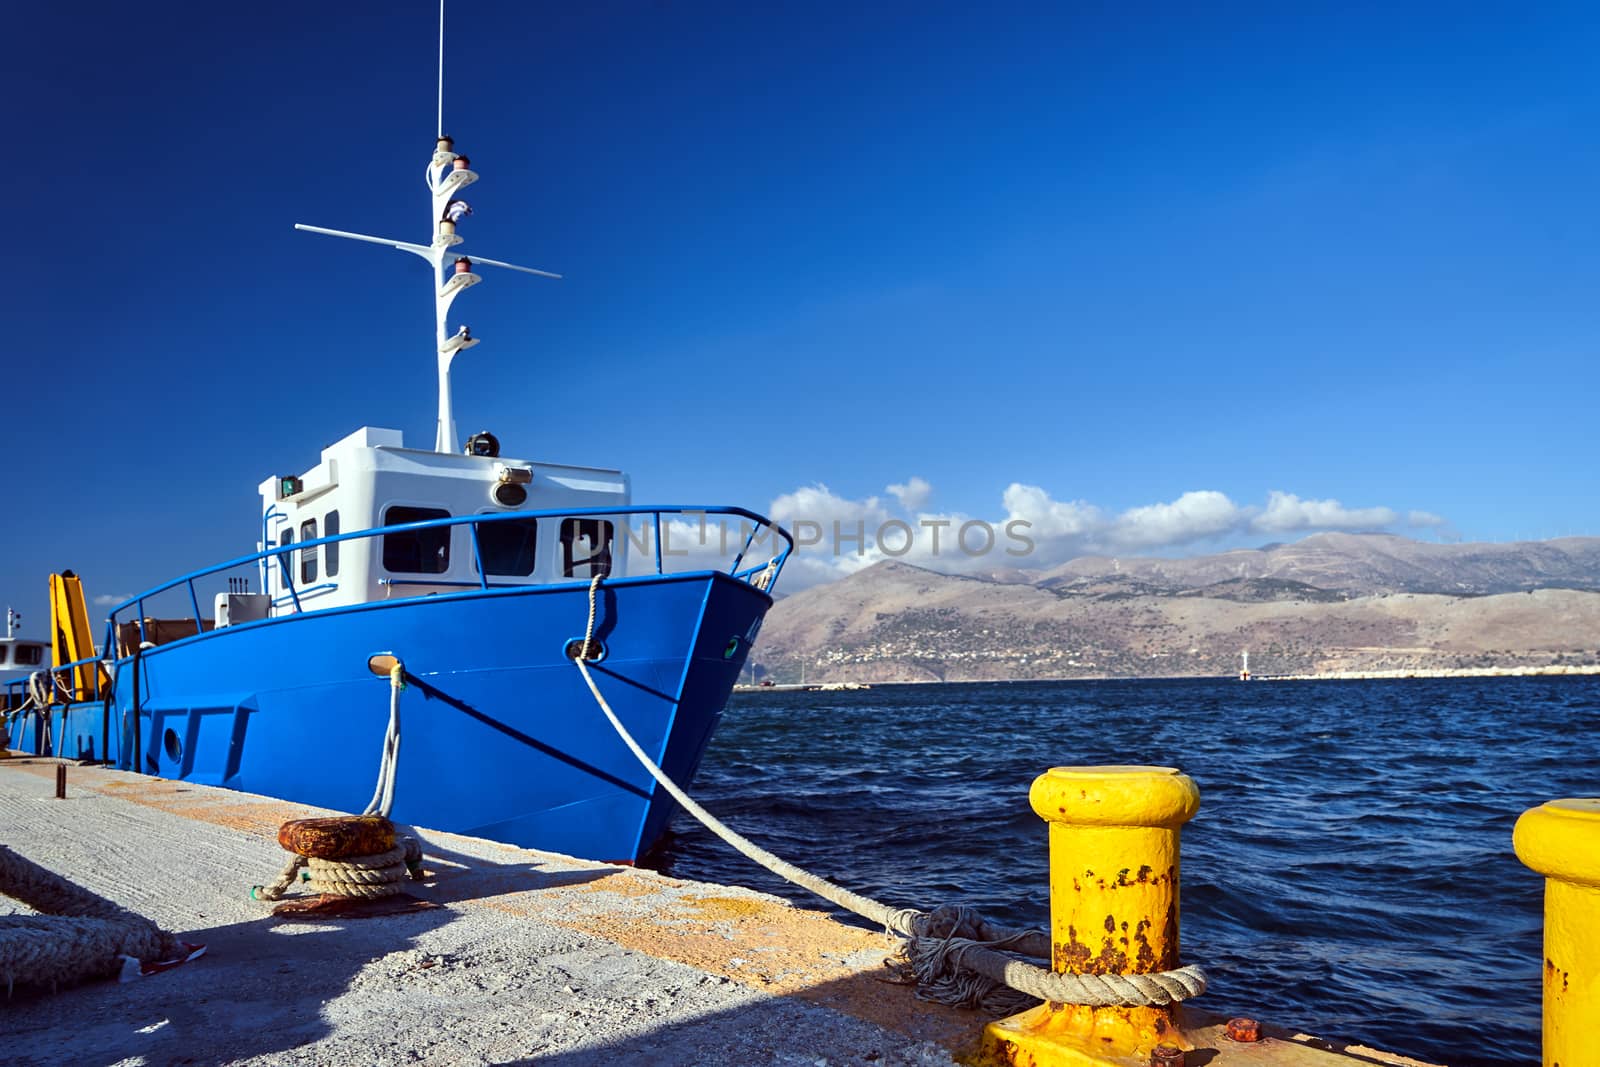 A fishing vessel moored in the port of Lixouri on the island of Kefalonia, Greece